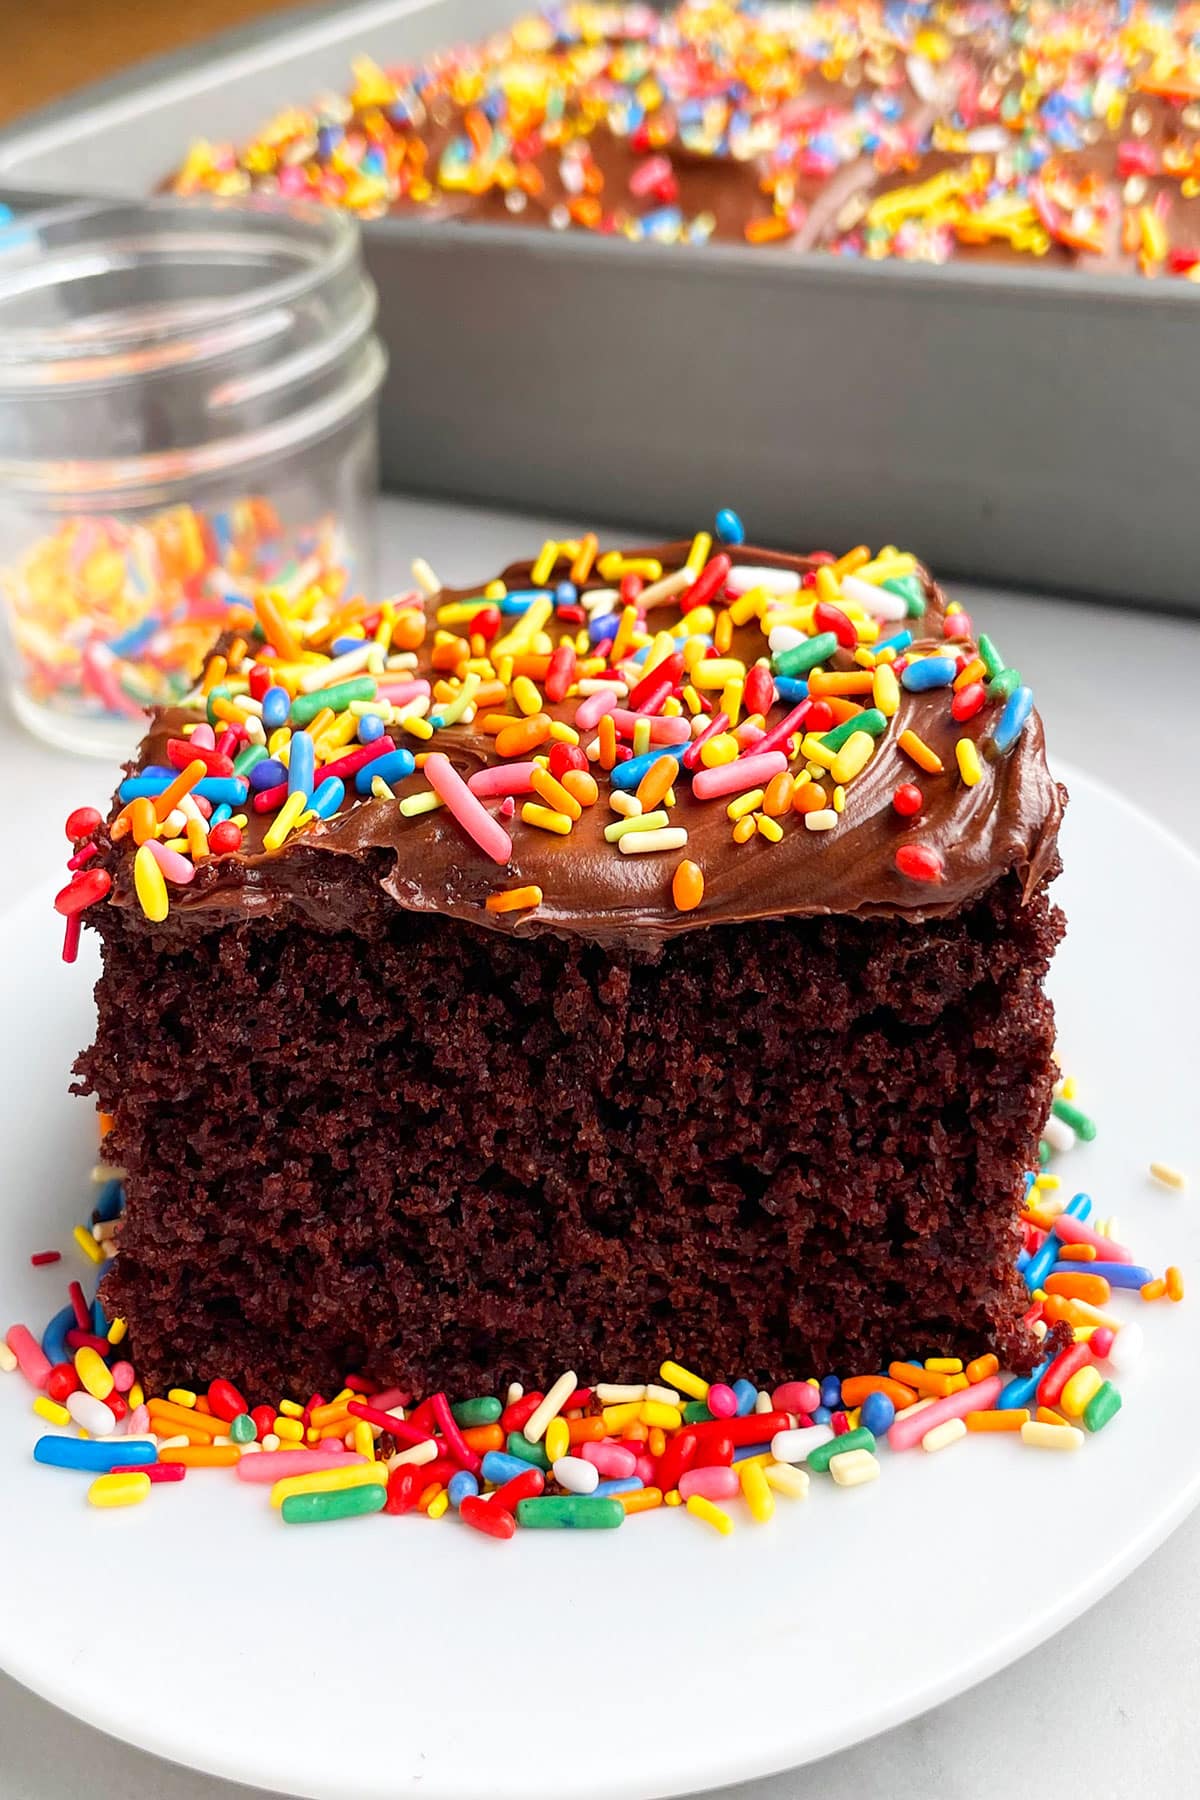 Slice of Chocolate Sheet Cake With Fudge Chocolate Frosting and Sprinkles on White Plate